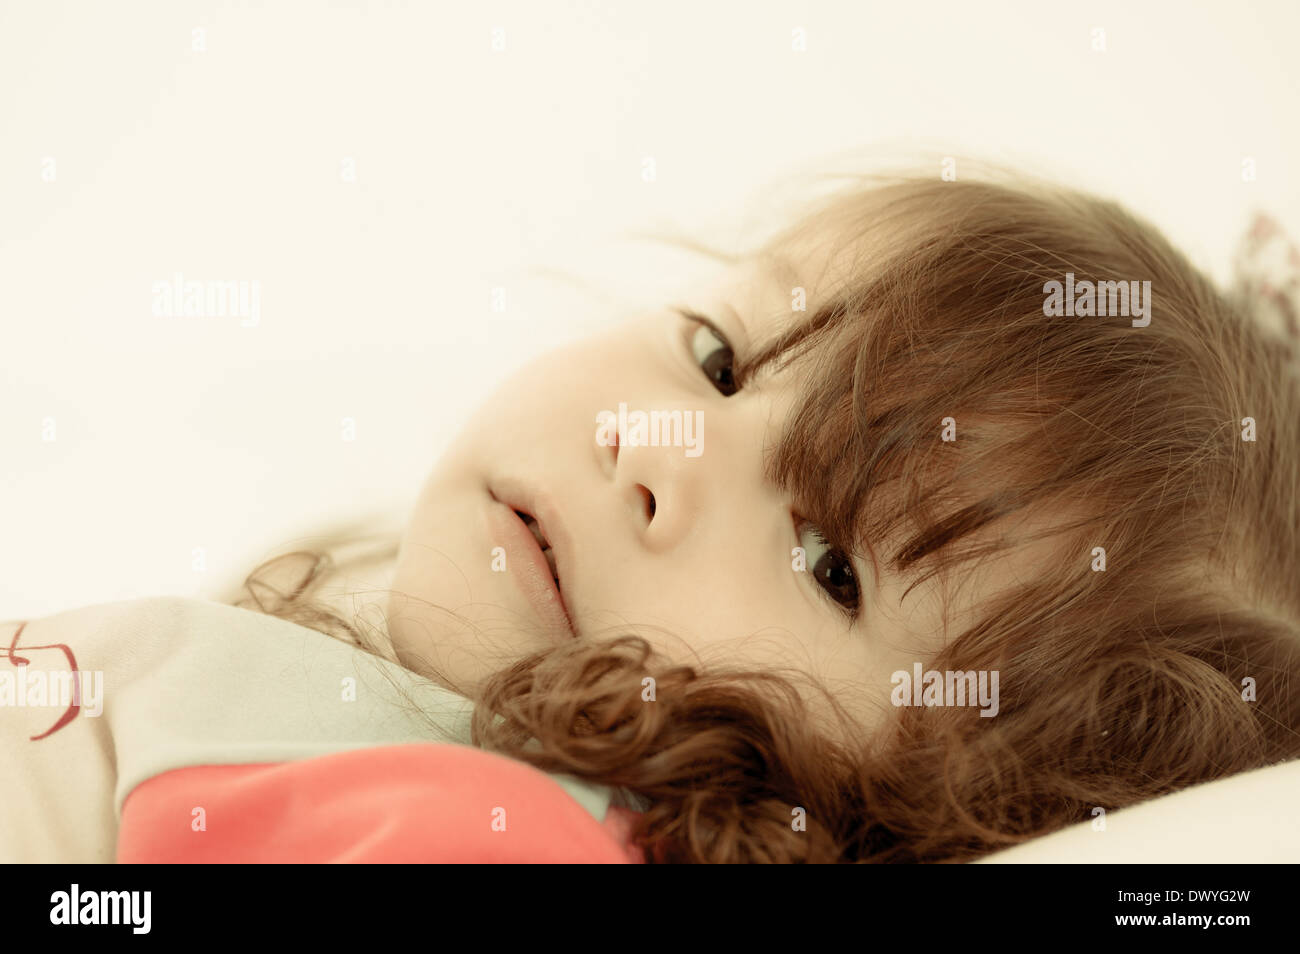 Sad little girl lying in bed colortoned Stock Photo